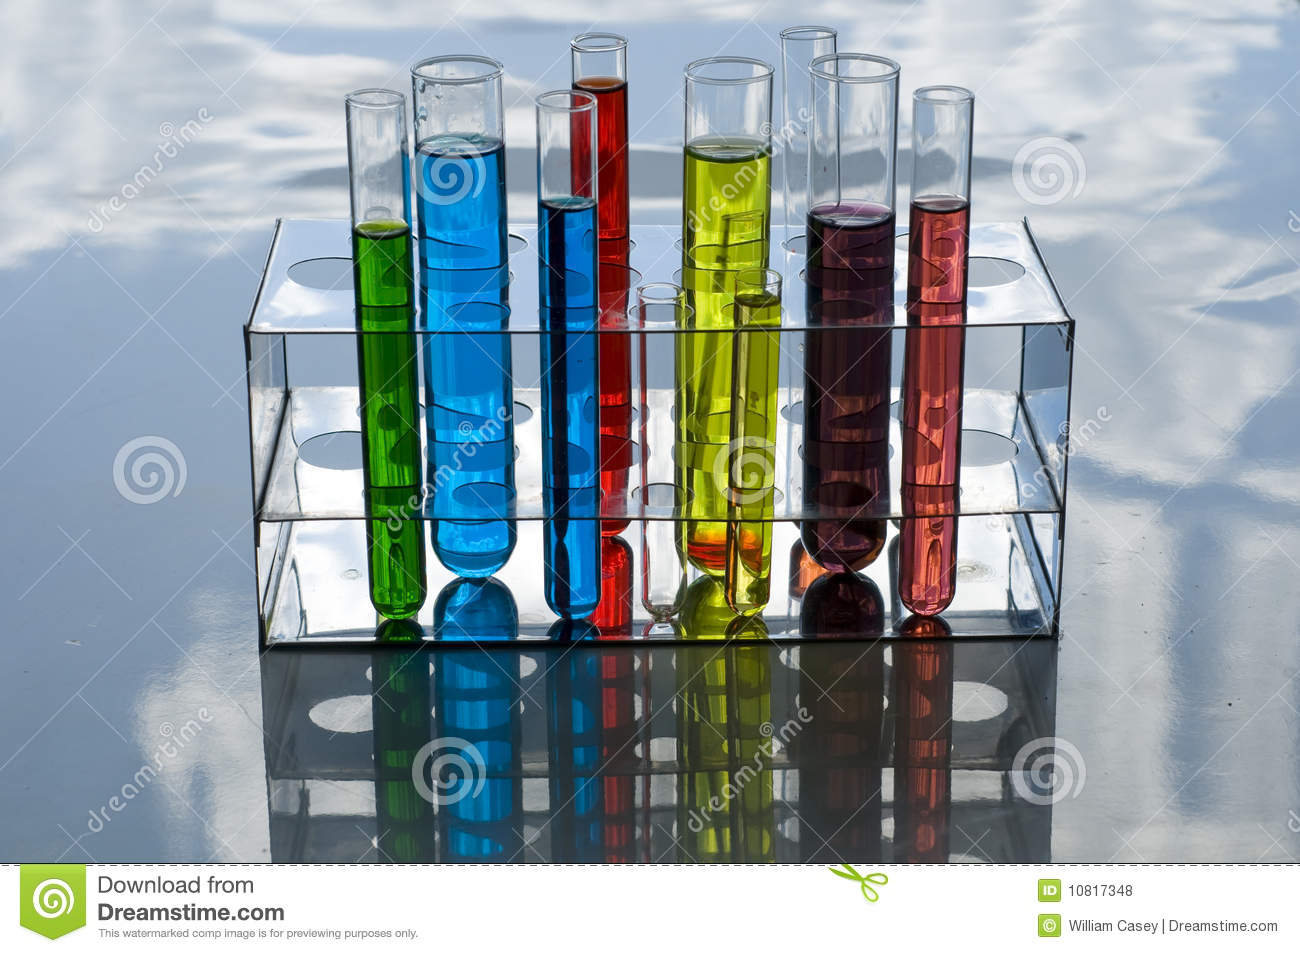 Collection Of Laboratory Equipment Including Beakers And Flasks 